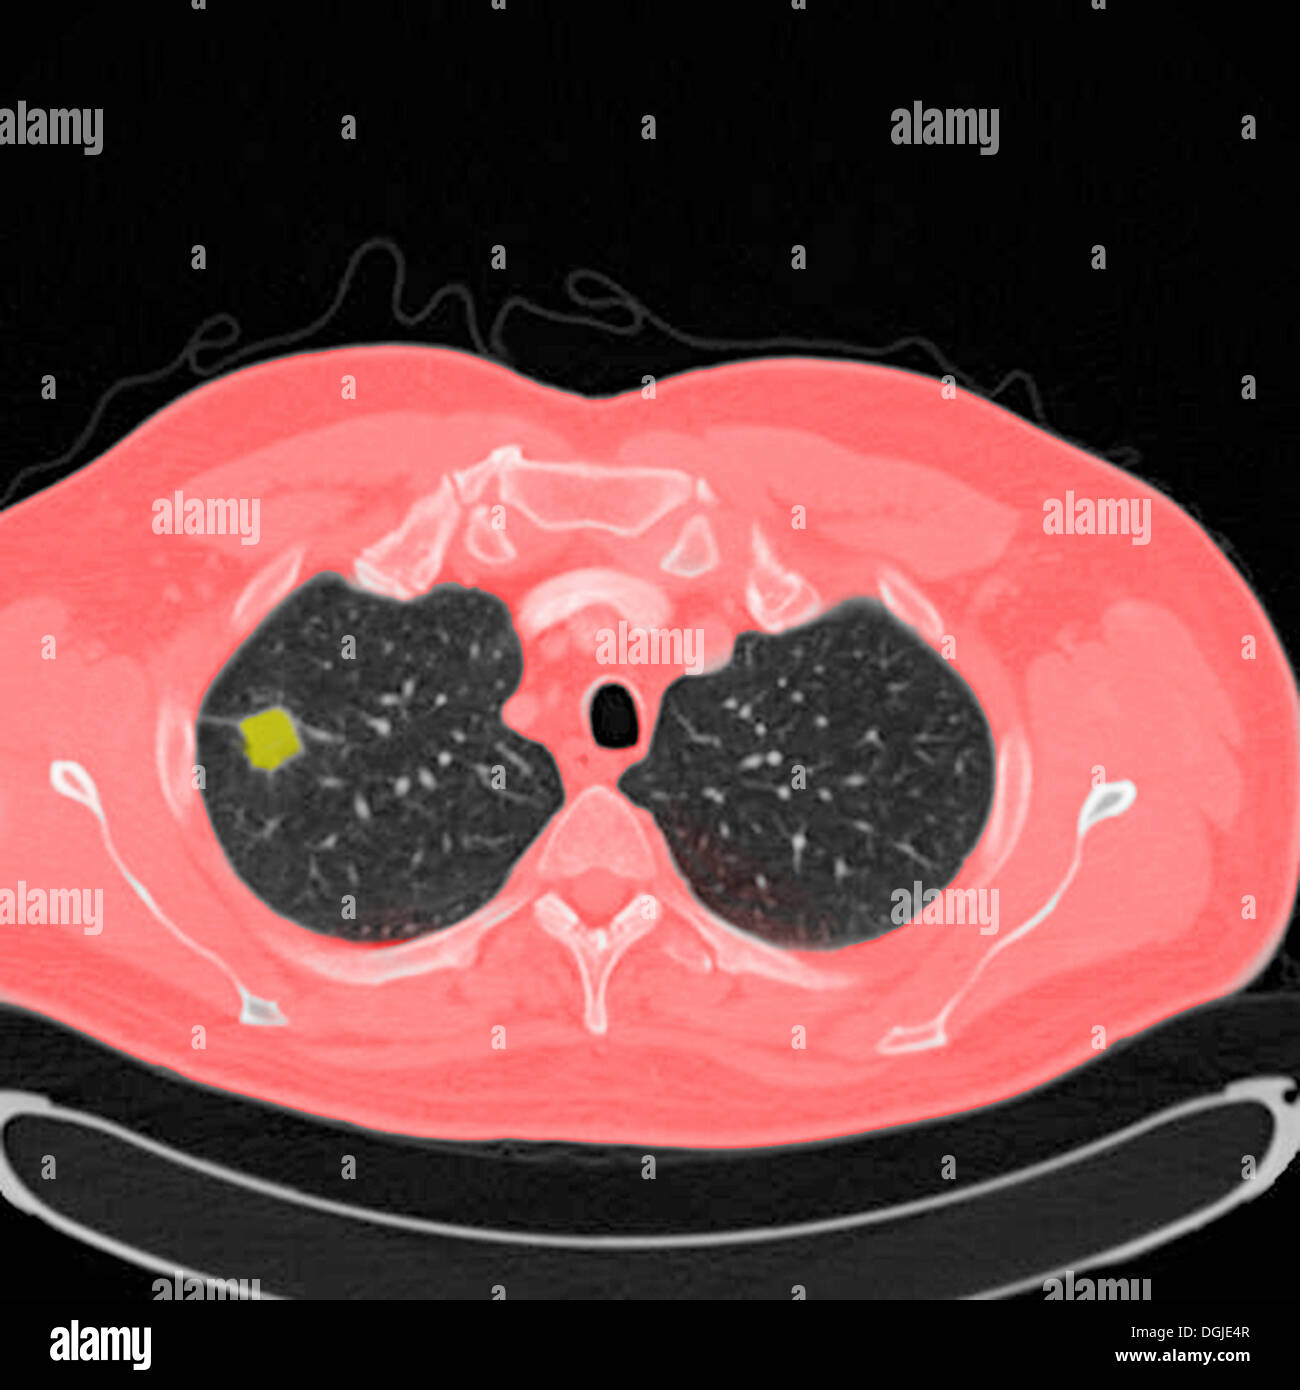 Chest CT scan (X-ray computed tomography) of a male 54 year old patient. Tumour can be seen in the left upper lobe of his lungs Stock Photo